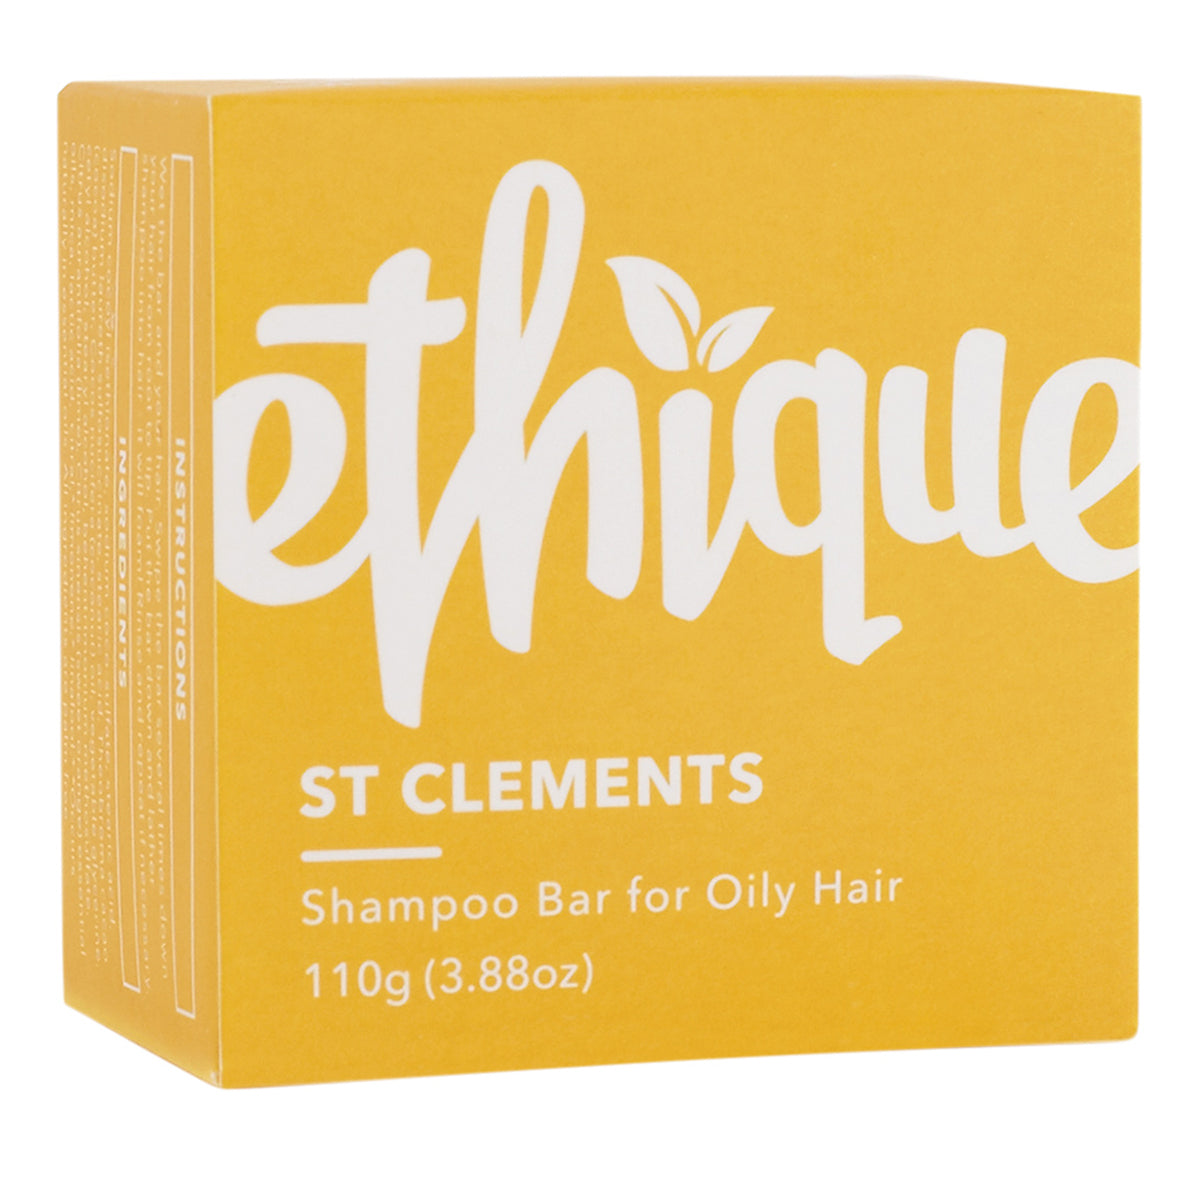 ETHIQUE Solid Shampoo Bar  St Clements - Oily Hair 110g